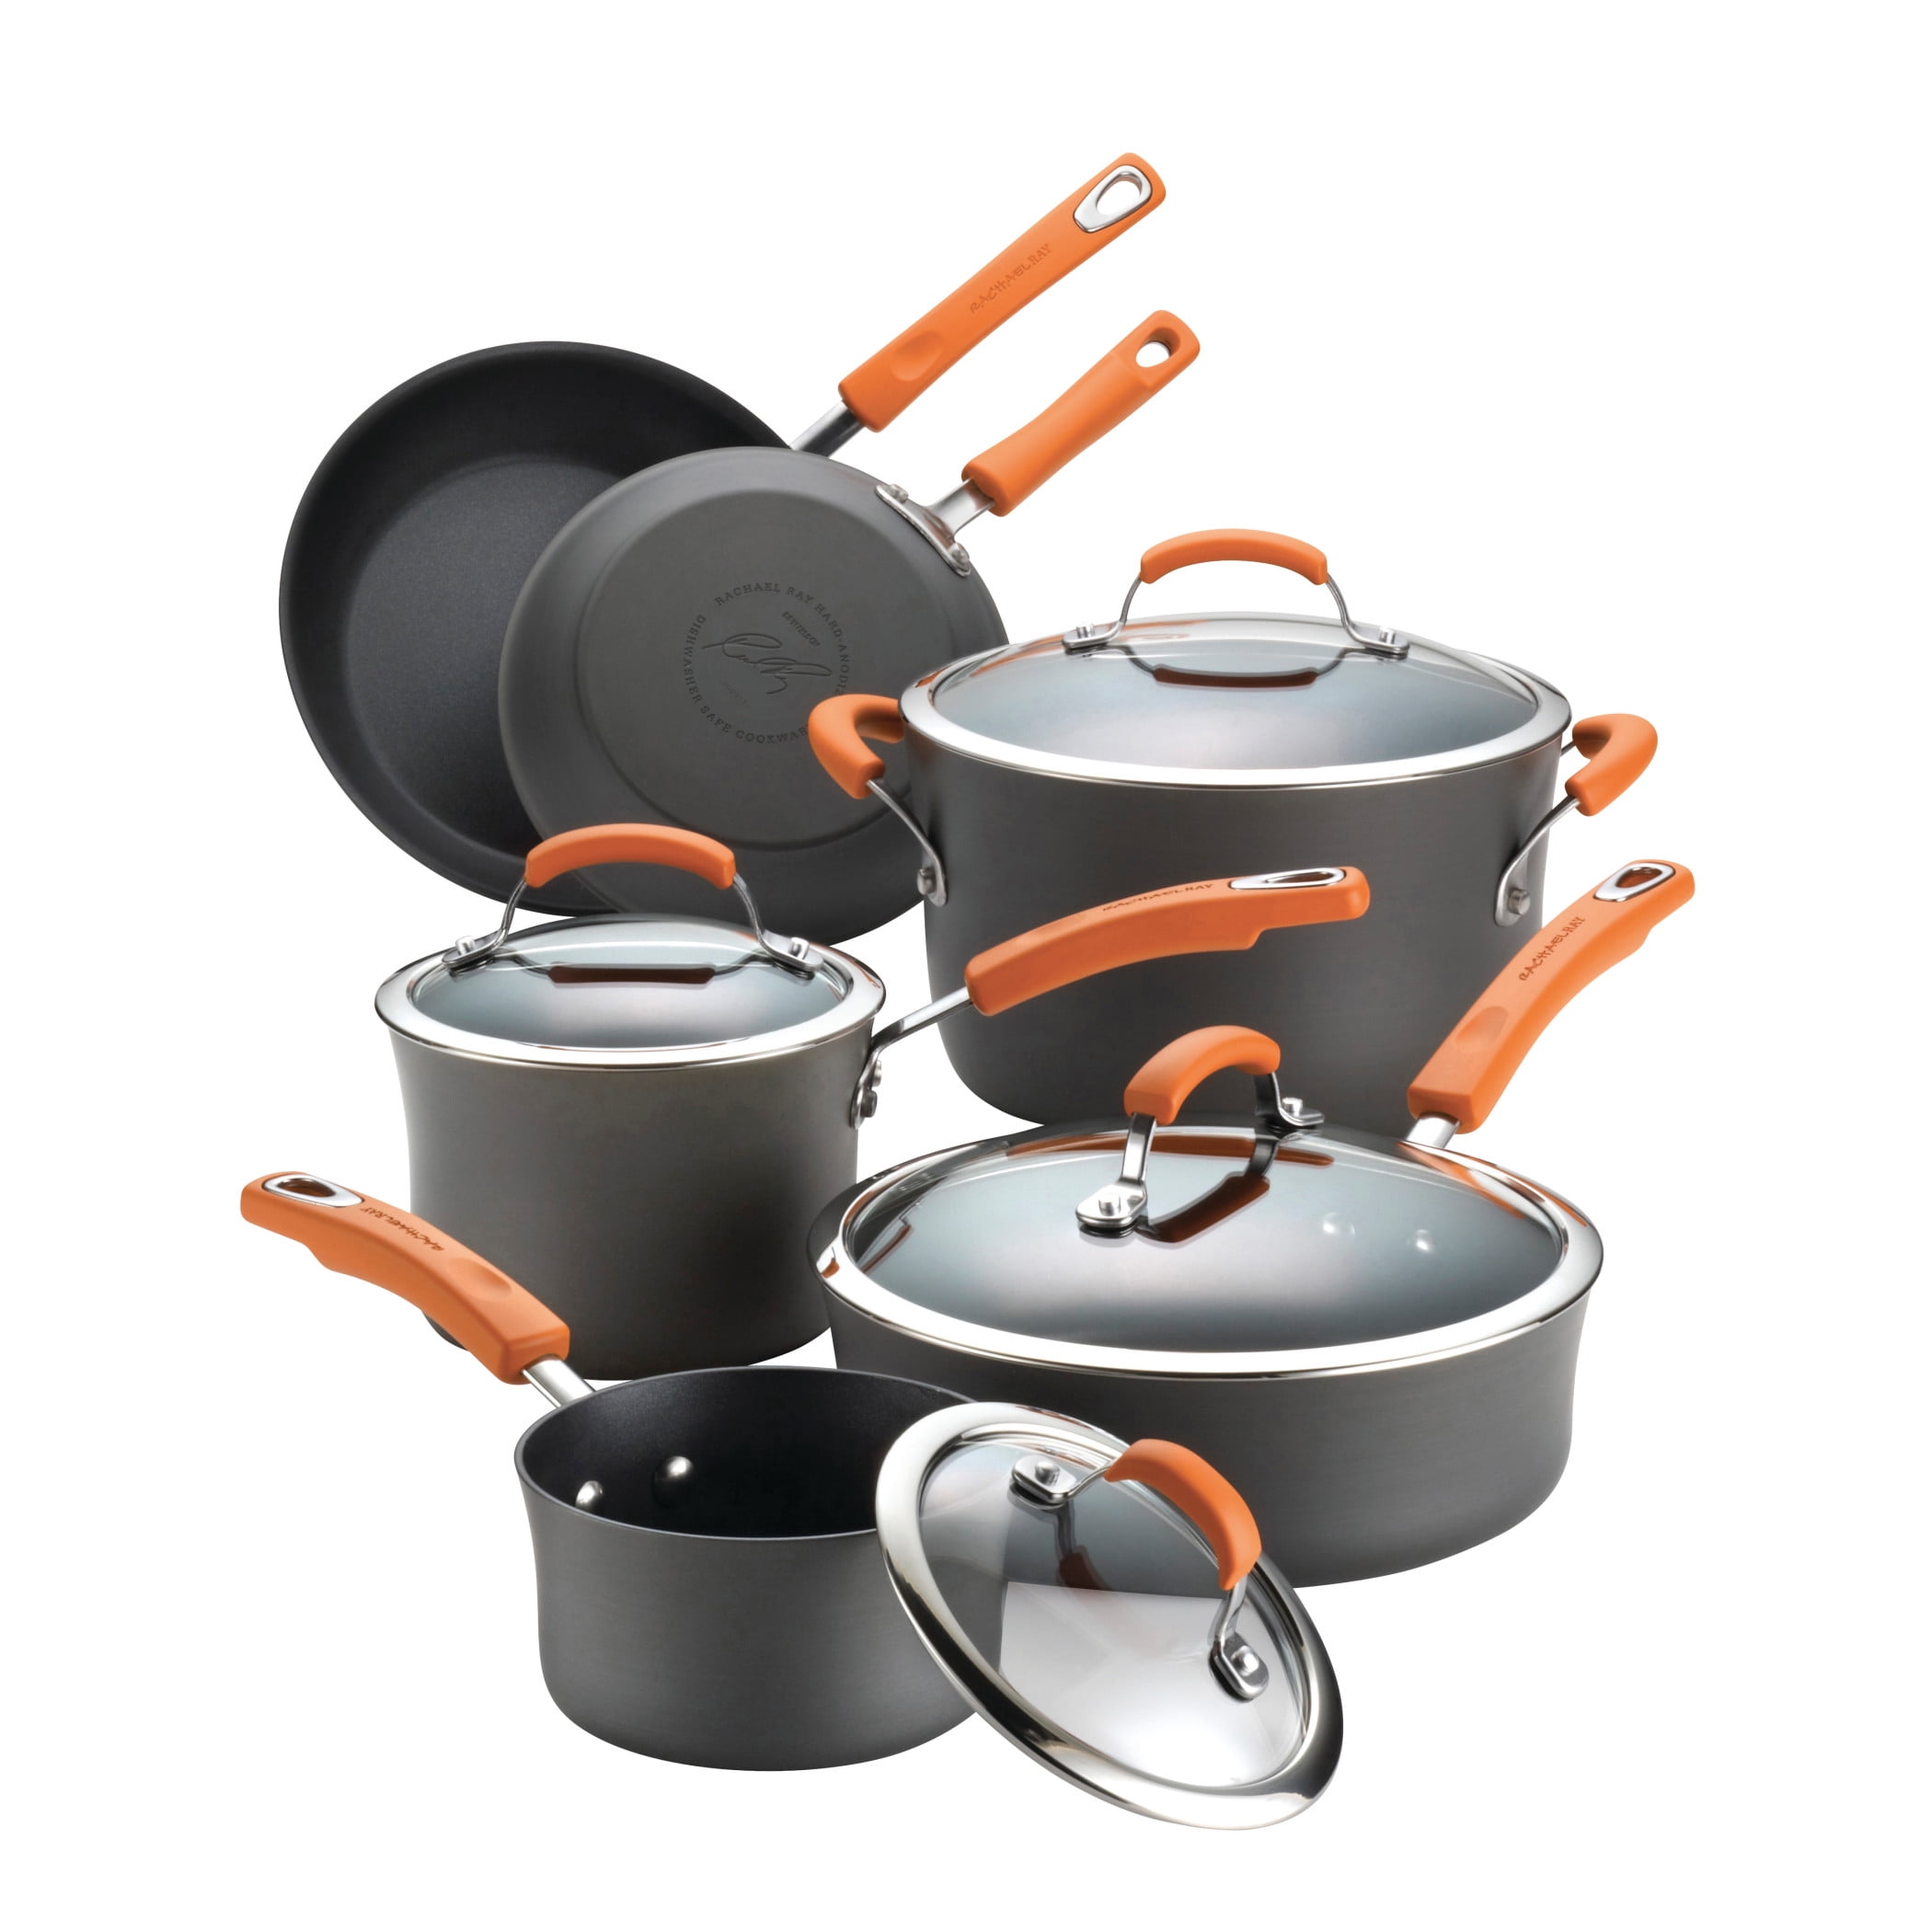 Food Network 10-pc. Hard-Anodized Nonstick Space-Saving Cookware Set Light  Grey